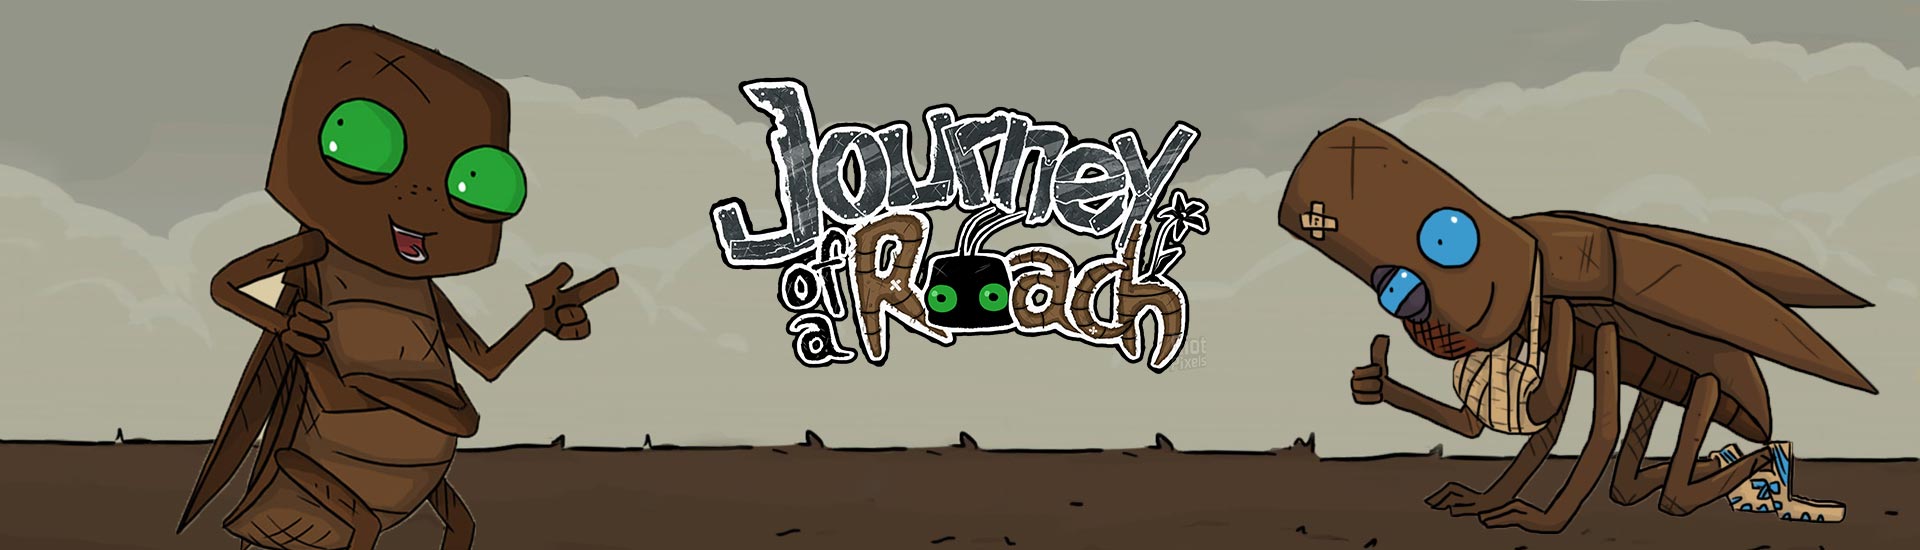 Journey of a Roach cover